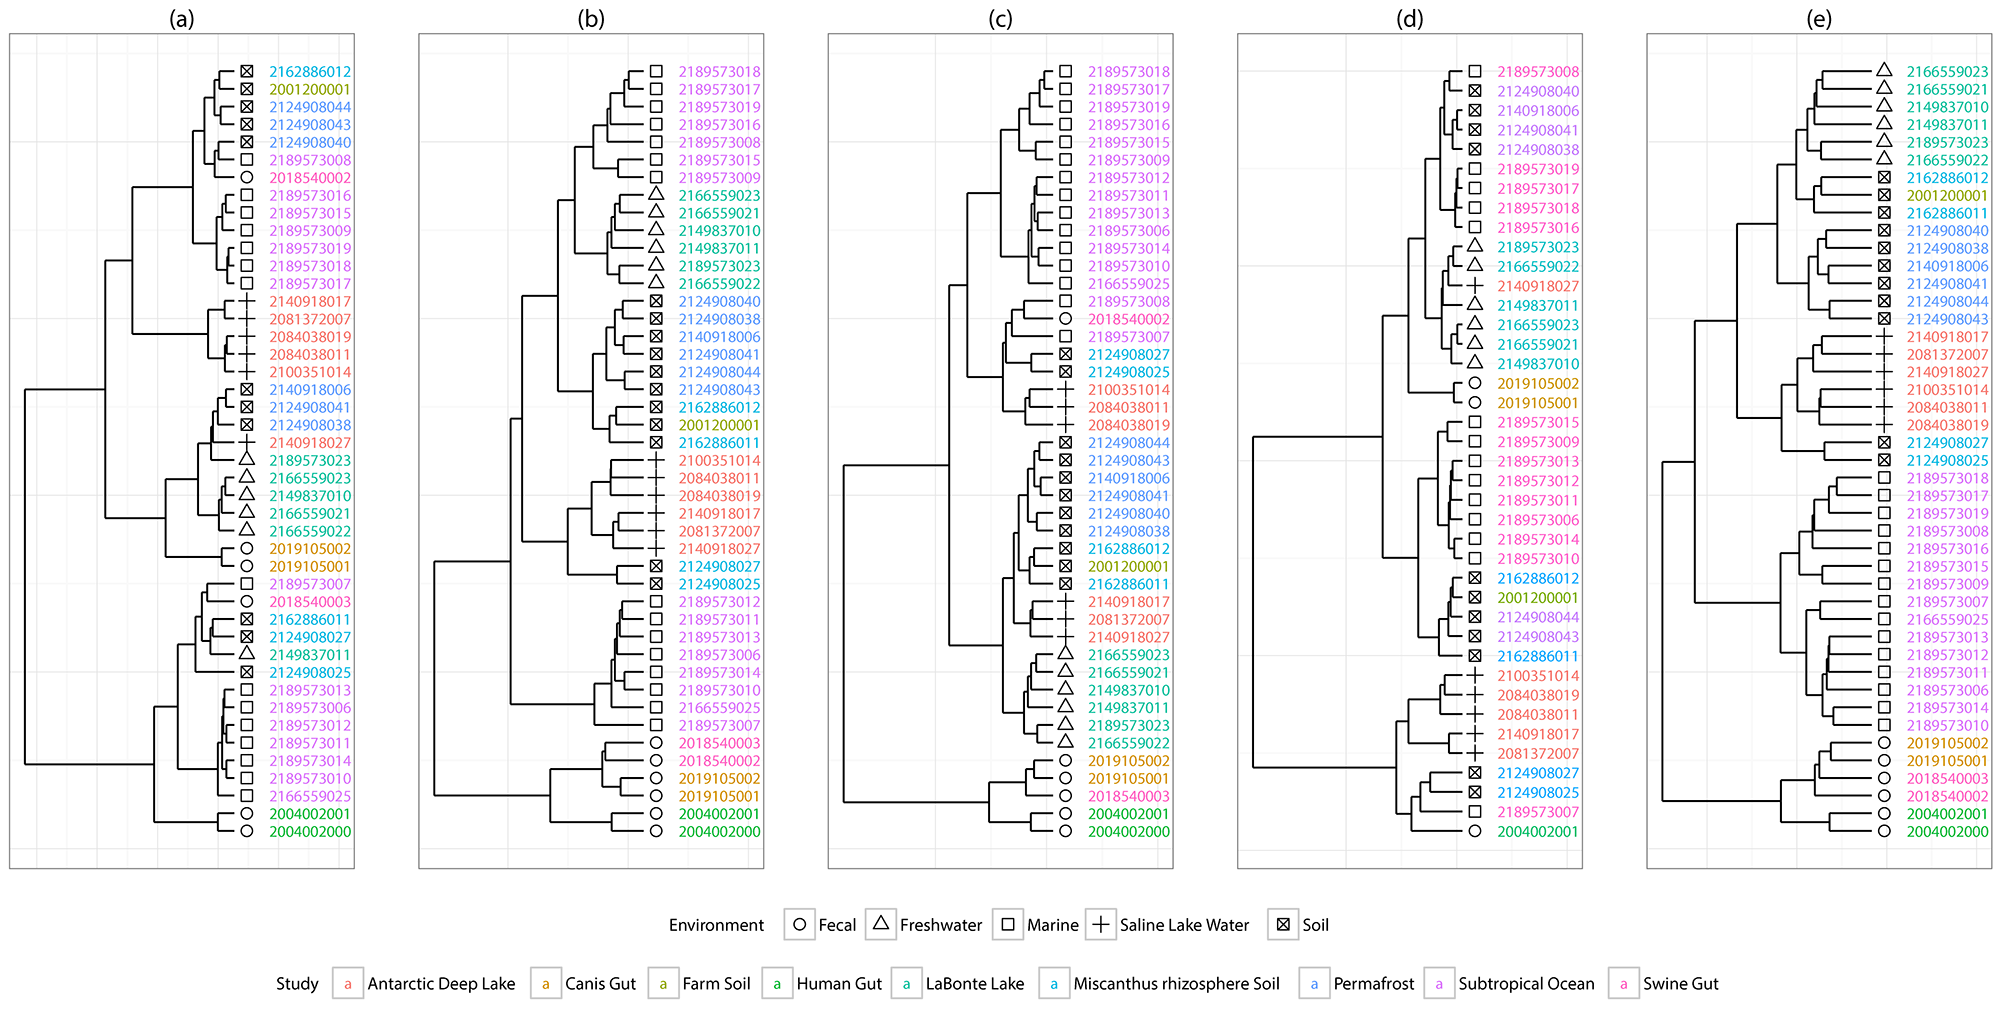 Hierarchical clustering of 44 IMG/M metagenomics samples represented in dendrograms.